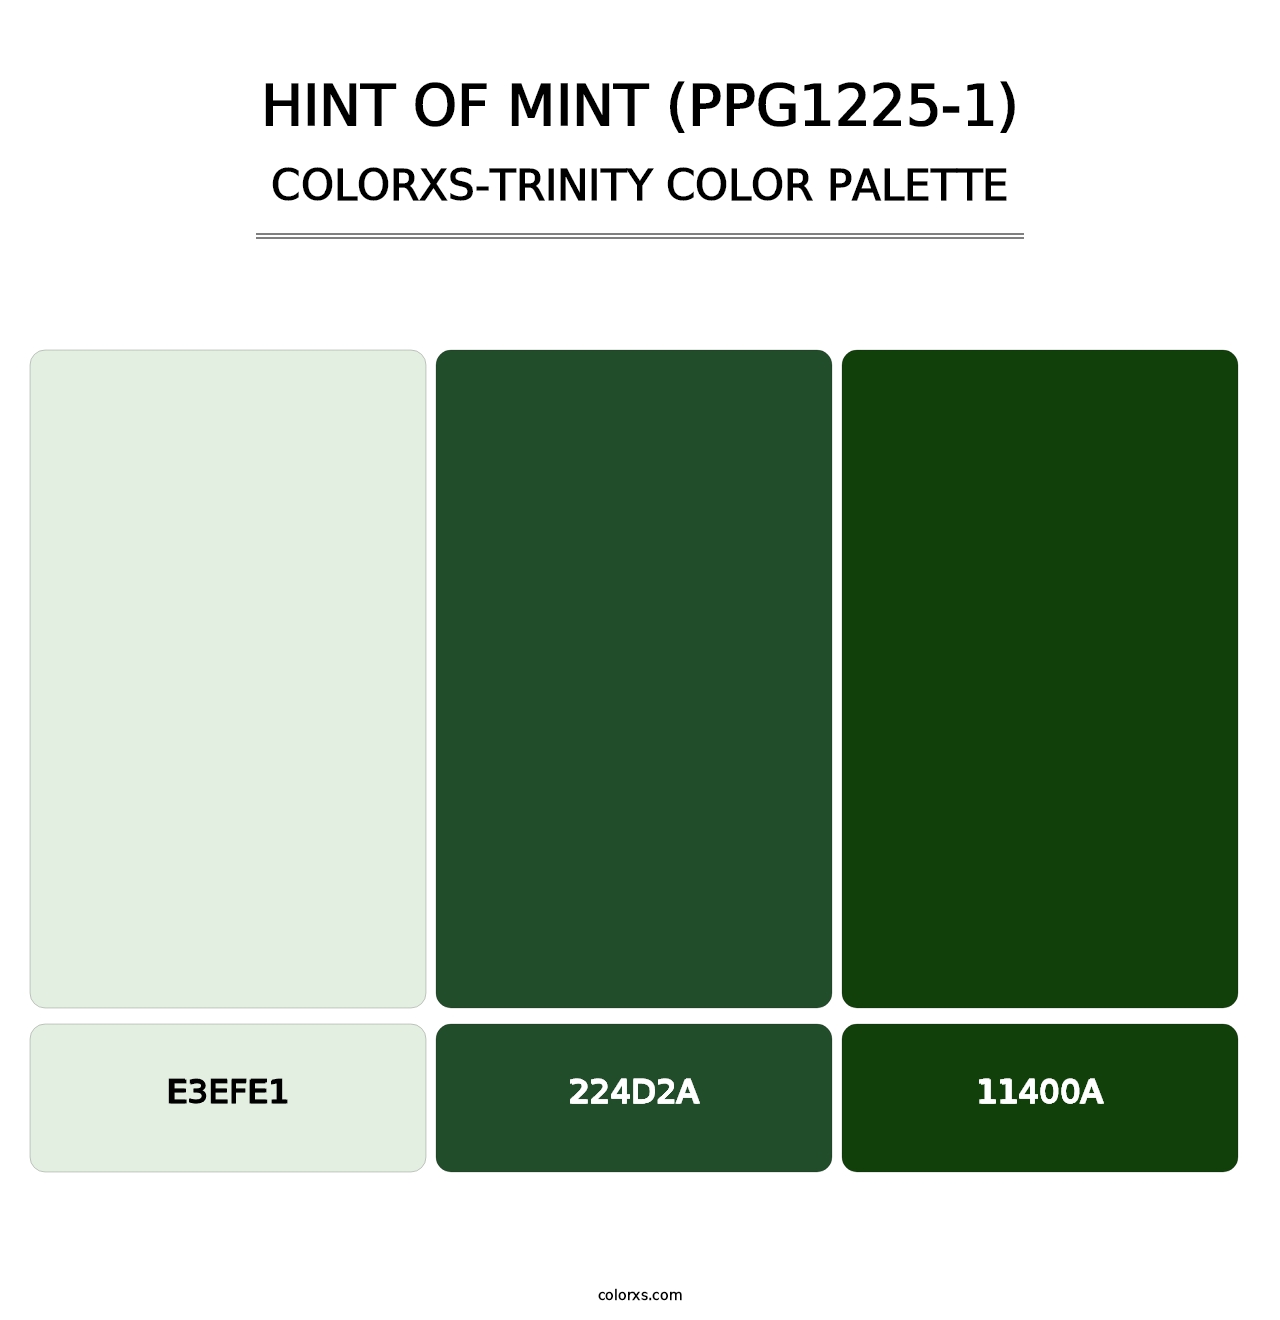 Hint Of Mint (PPG1225-1) - Colorxs Trinity Palette